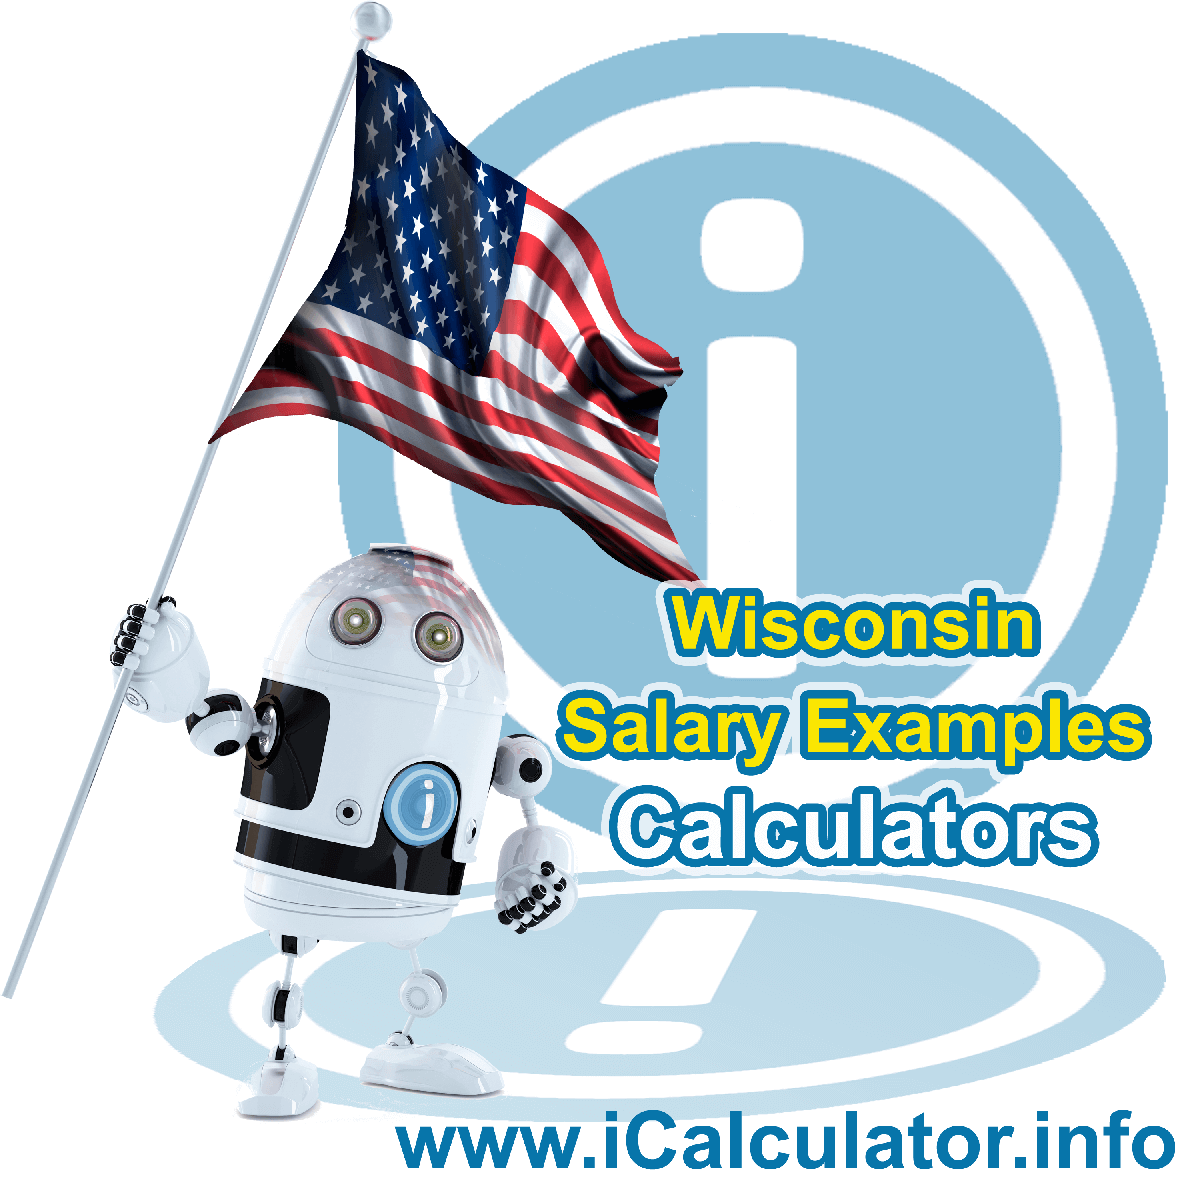 Wisconsin Salary Example for $ 150,000.00 in 2023 | iCalculator™ | $ 150,000.00 salary example for employee and employer paying Wisconsin State tincome taxes. Detailed salary after tax calculation including Wisconsin State Tax, Federal State Tax, Medicare Deductions, Social Security, Capital Gains and other income tax and salary deductions complete with supporting Wisconsin state tax tables 